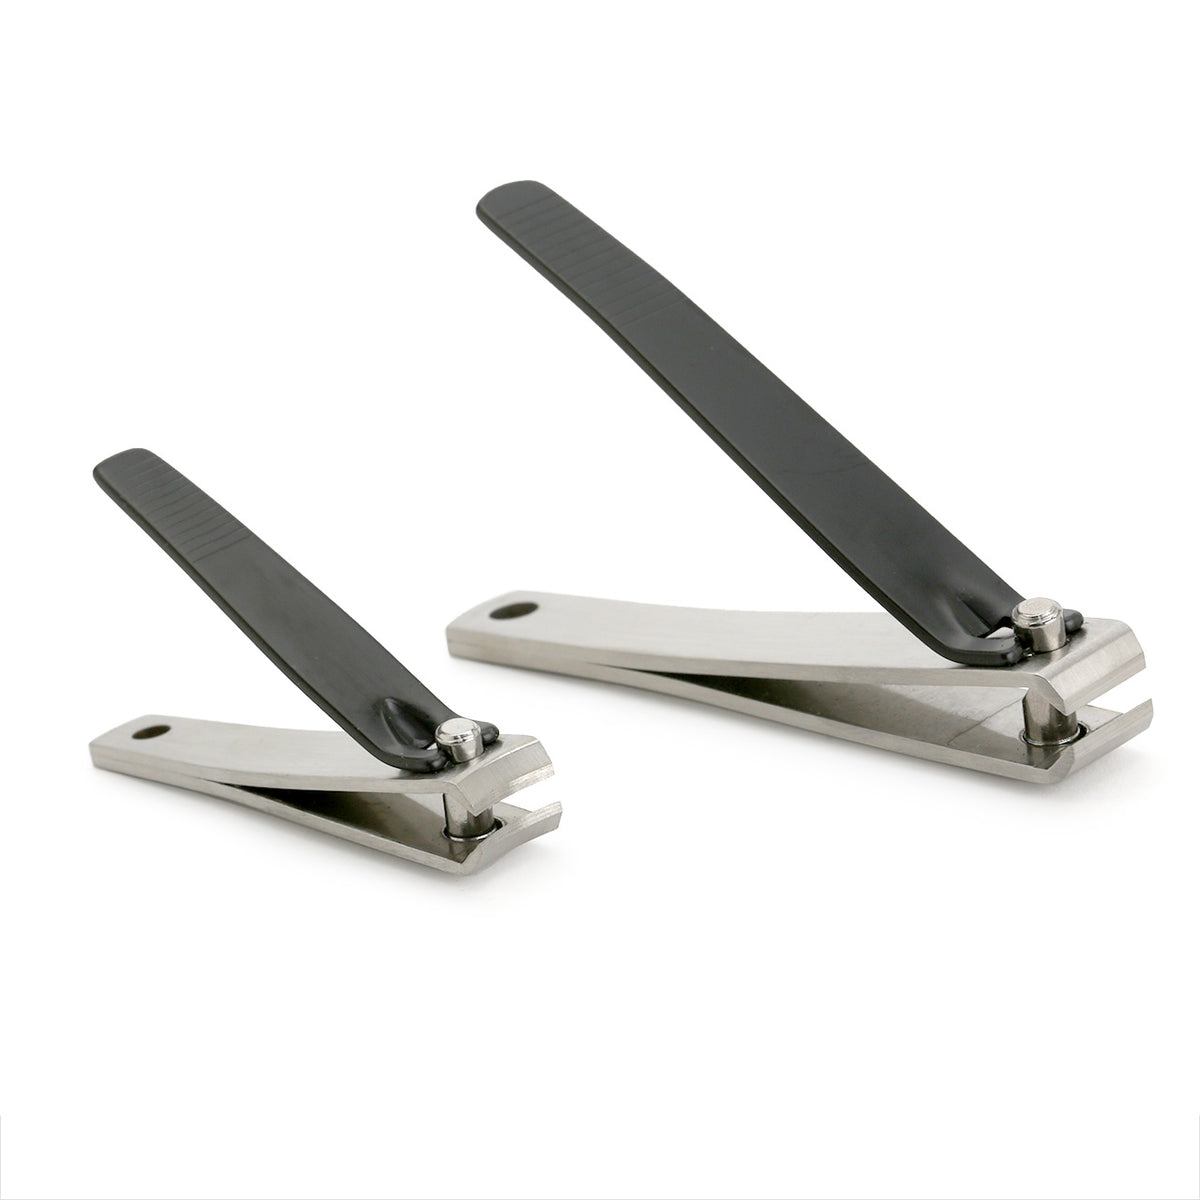 Open fingernail and toenail clippers from Tweezerman. They have a slim profile , the lever twists ninety dgrees and the flips backmonto itself to be in the open leverage position.from the